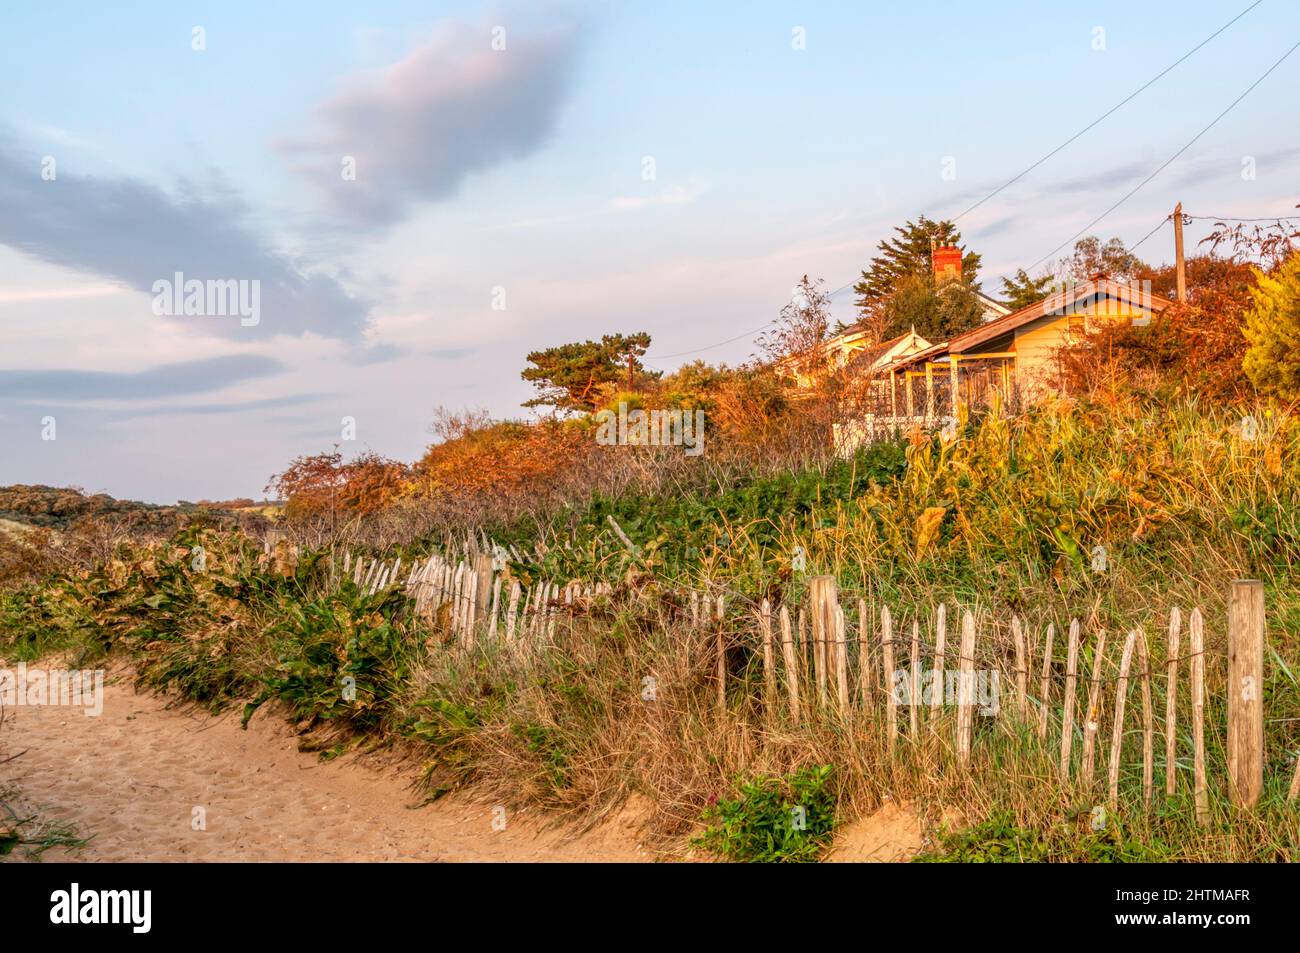 Evening light on holiday cabins in sand dunes at Old Hunstanton on the North Norfolk coast. Stock Photo